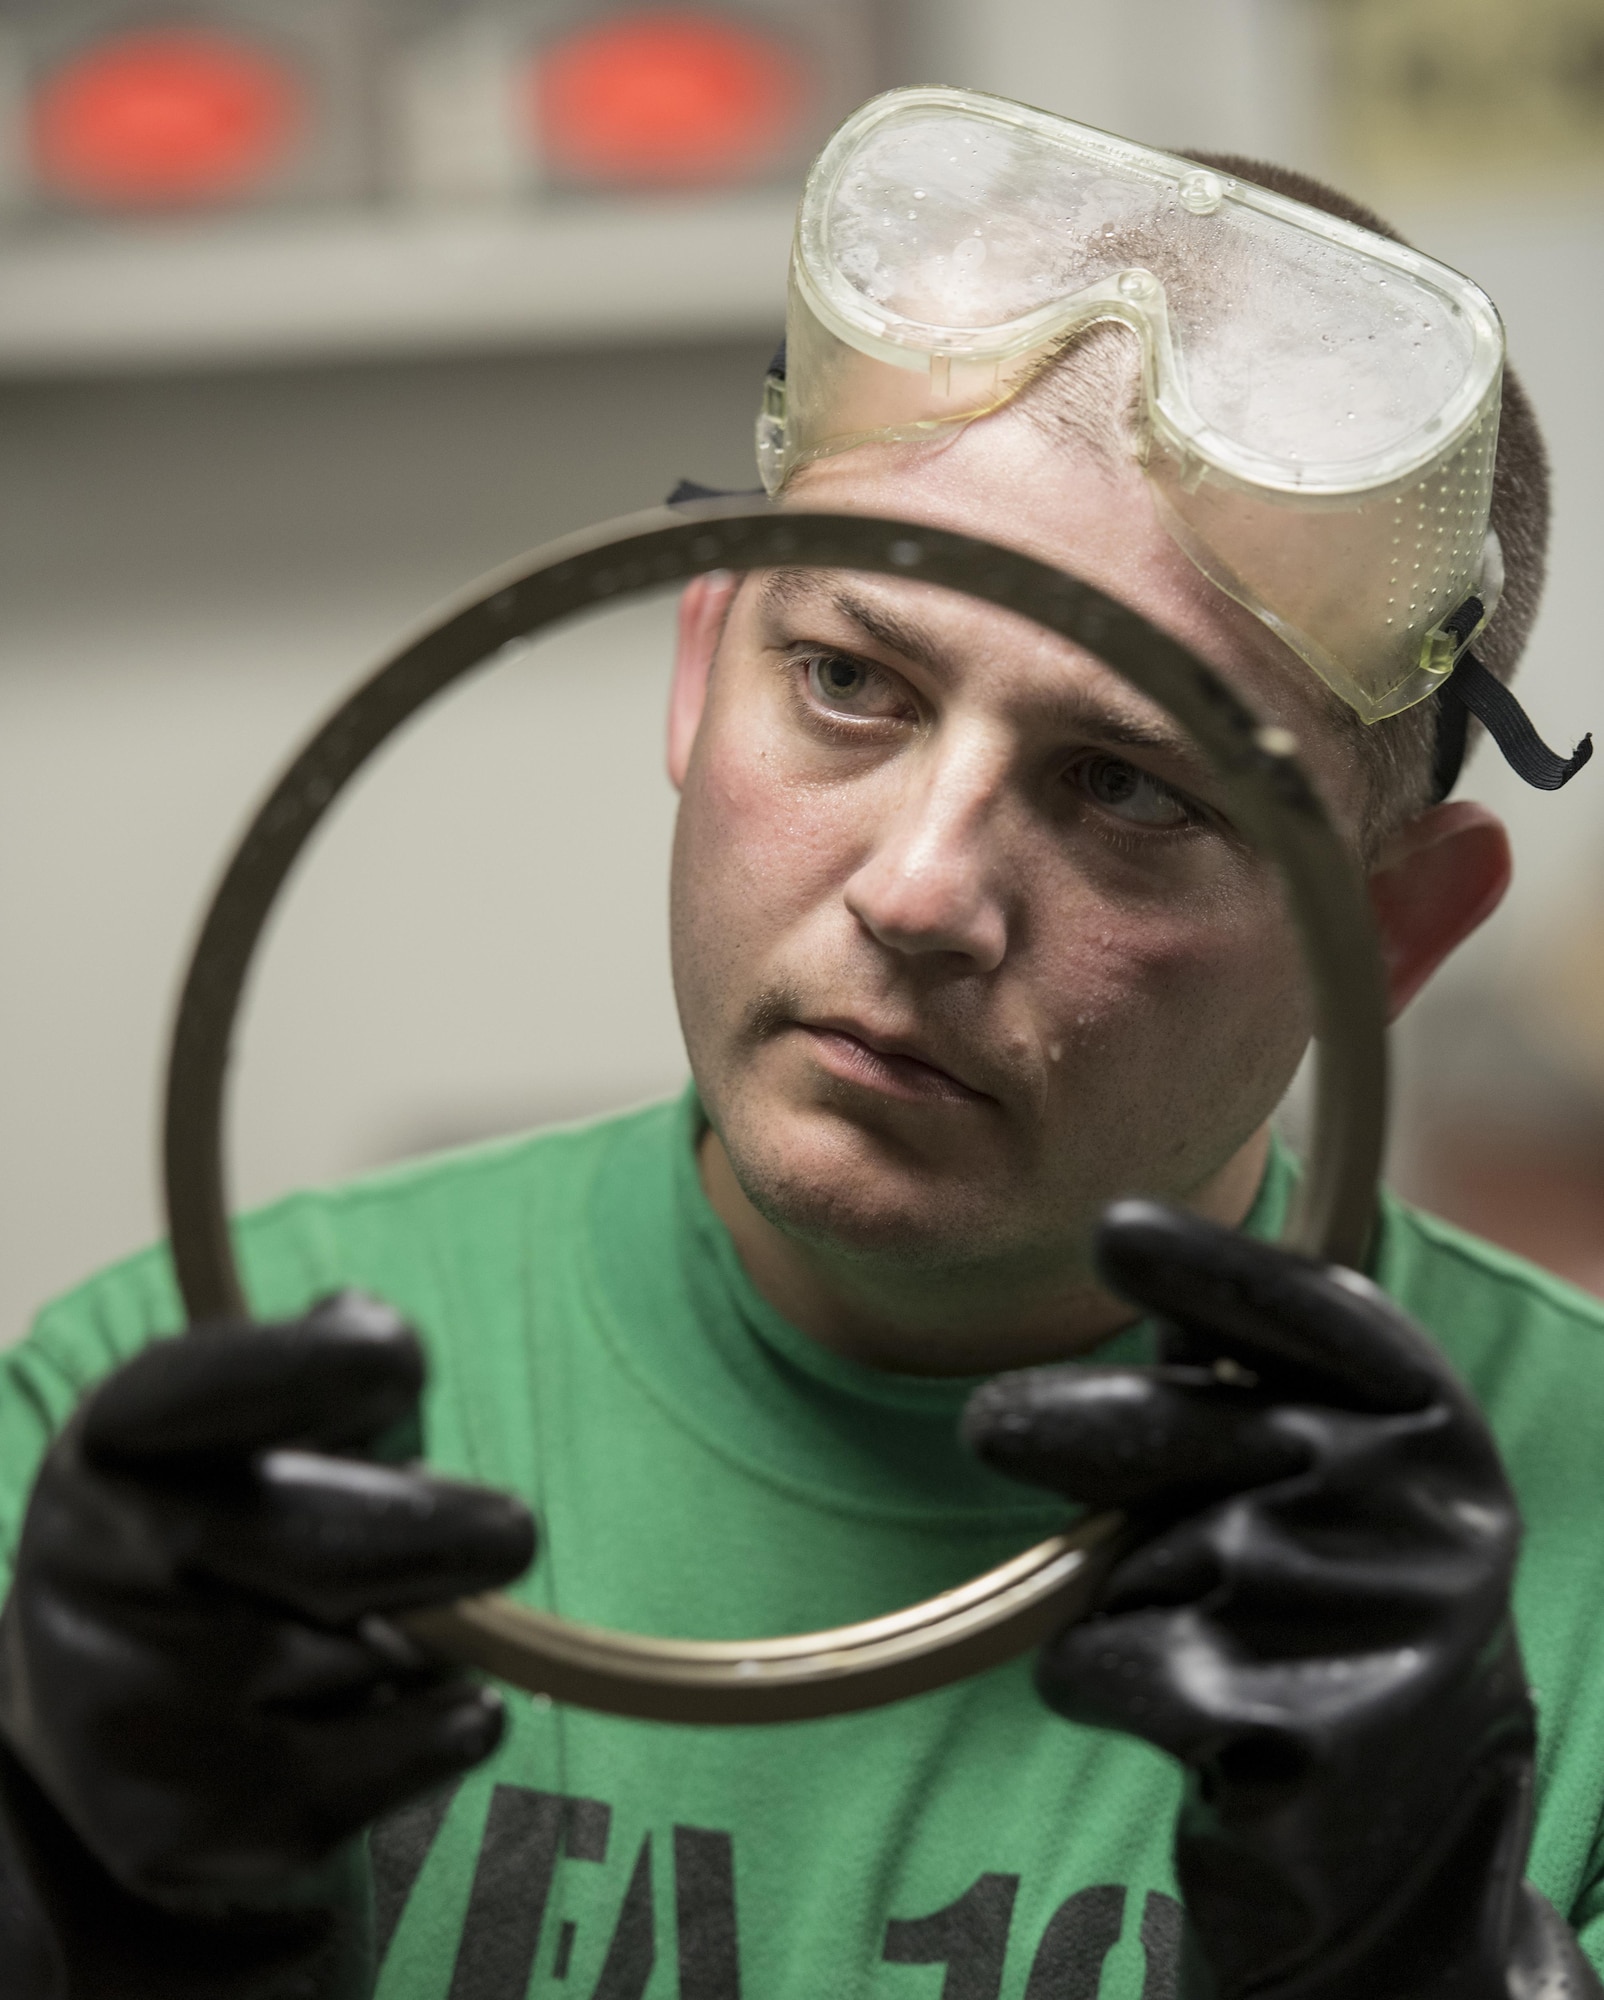 U.S. Air Force Staff Sgt. Mark Gower, 33rd Maintenance Squadron wheel and tire technician, inspects a flange retainer assembly from an F-35C Lightning II nose wheel Sept. 6, 2017, aboard the Nimitz-class aircraft carrier USS Abraham Lincoln (CVN 72). Two Airmen and two Sailors from 33rd MXS qualified Abraham Lincoln Sailors to operate F-35 support equipment bringing the U.S. Navy one step closer to initial operations capability. (U.S. Air Force photo by Staff Sgt. Peter Thompson/Released)